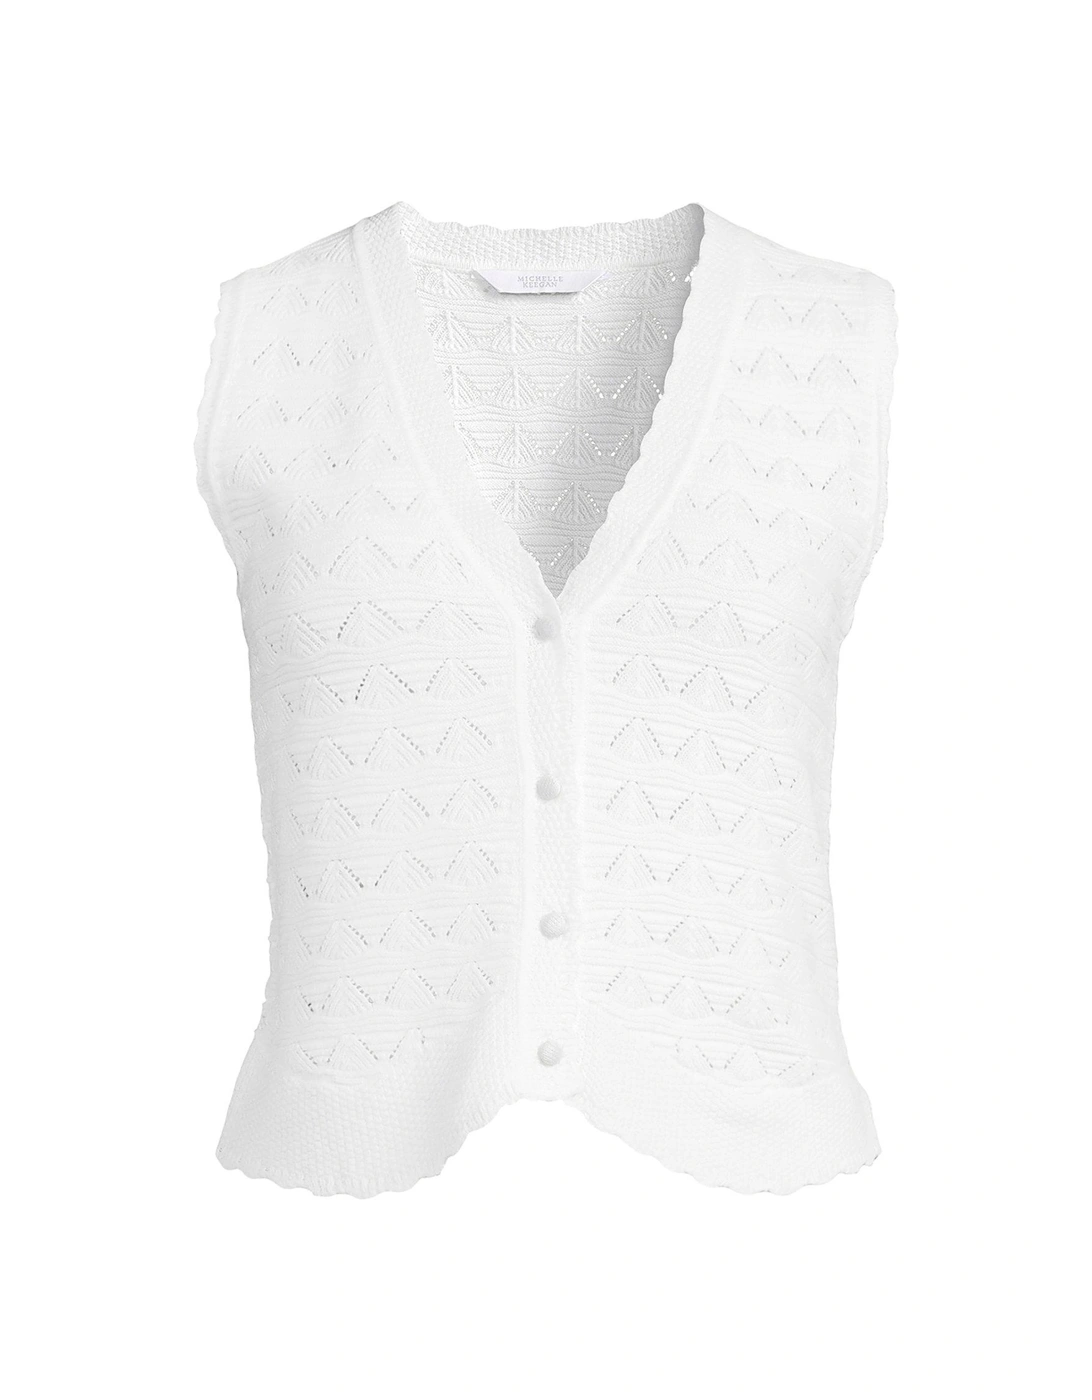 Knitted Co-ord Waistcoat - White 